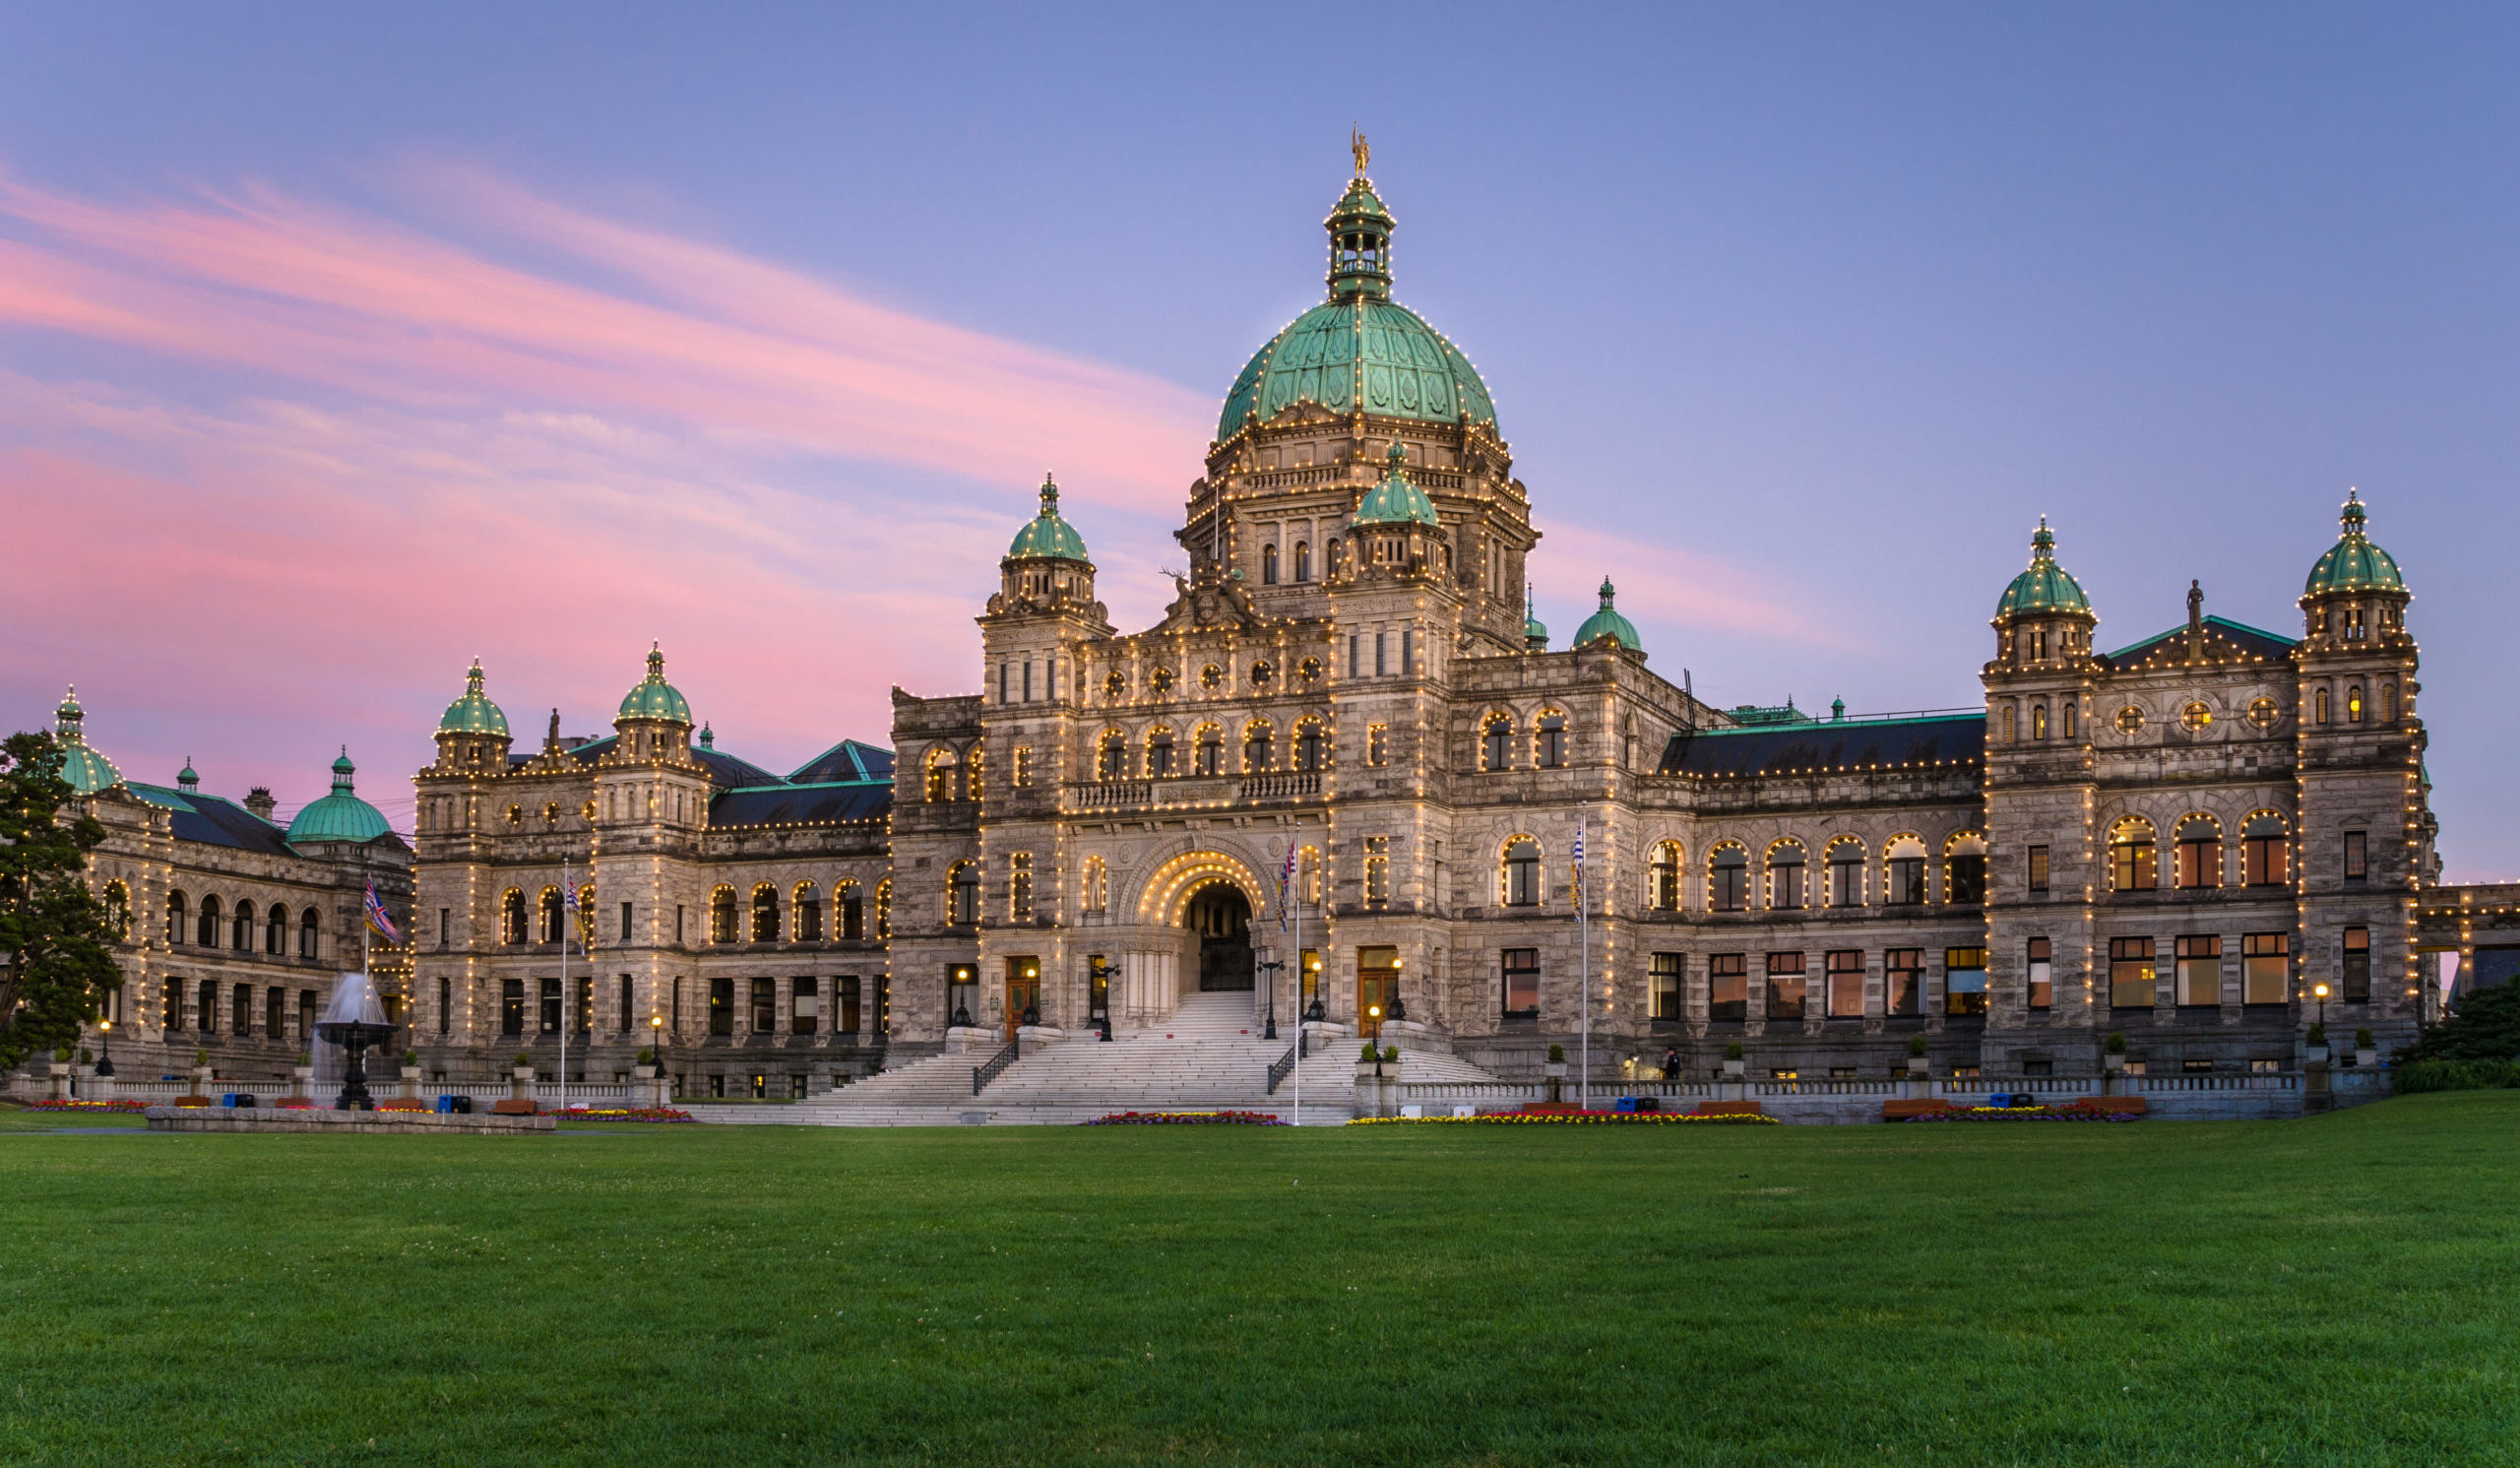 British Columbia Parliament Buildings at sunset in Victoria / Getty Images